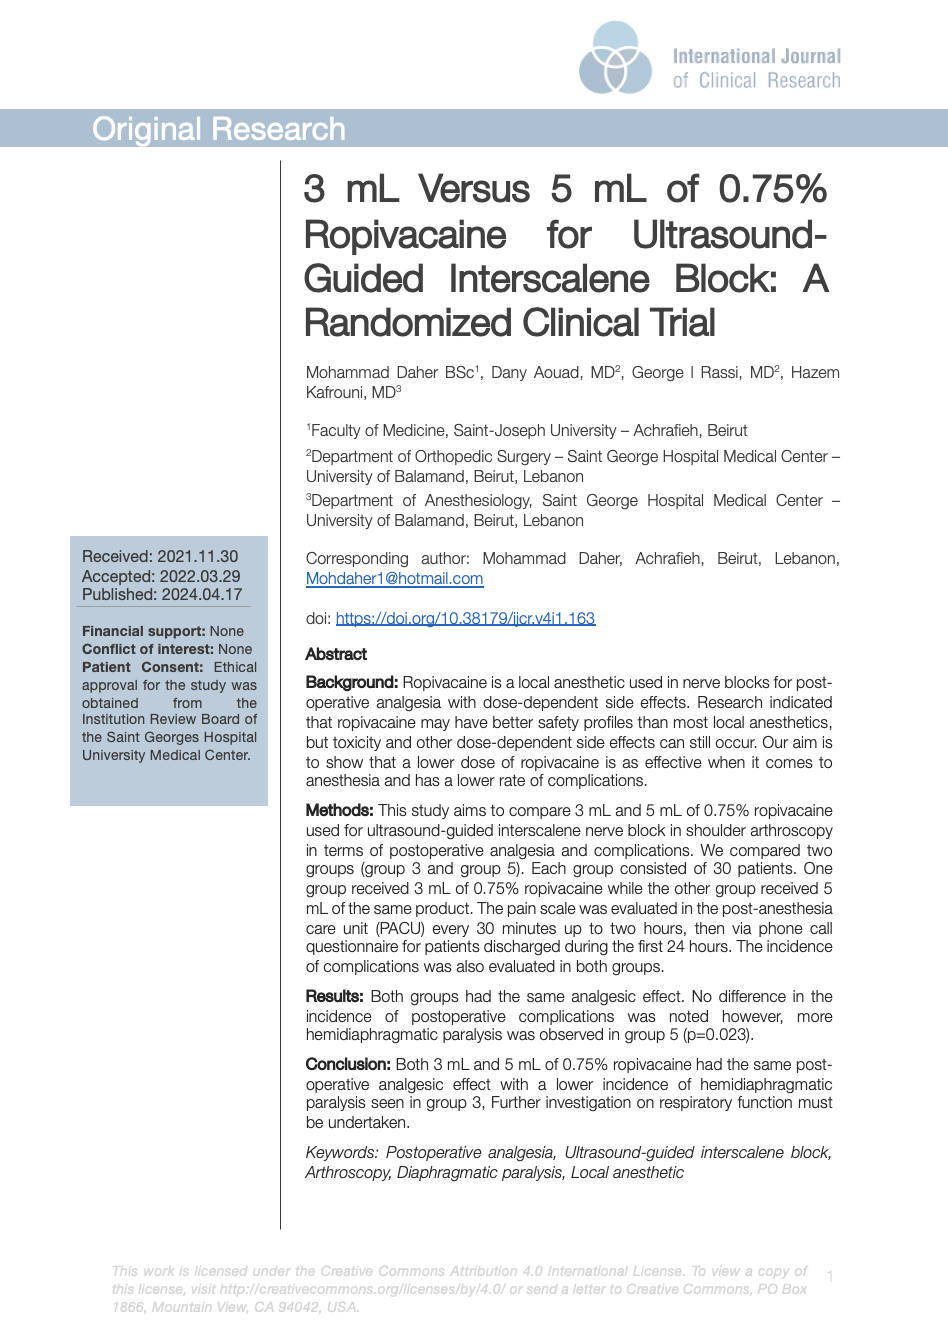 3 mL Versus 5 mL of 0.75% Ropivacaine for Ultrasound-Guided Interscalene Block: A Randomized Clinical Trial